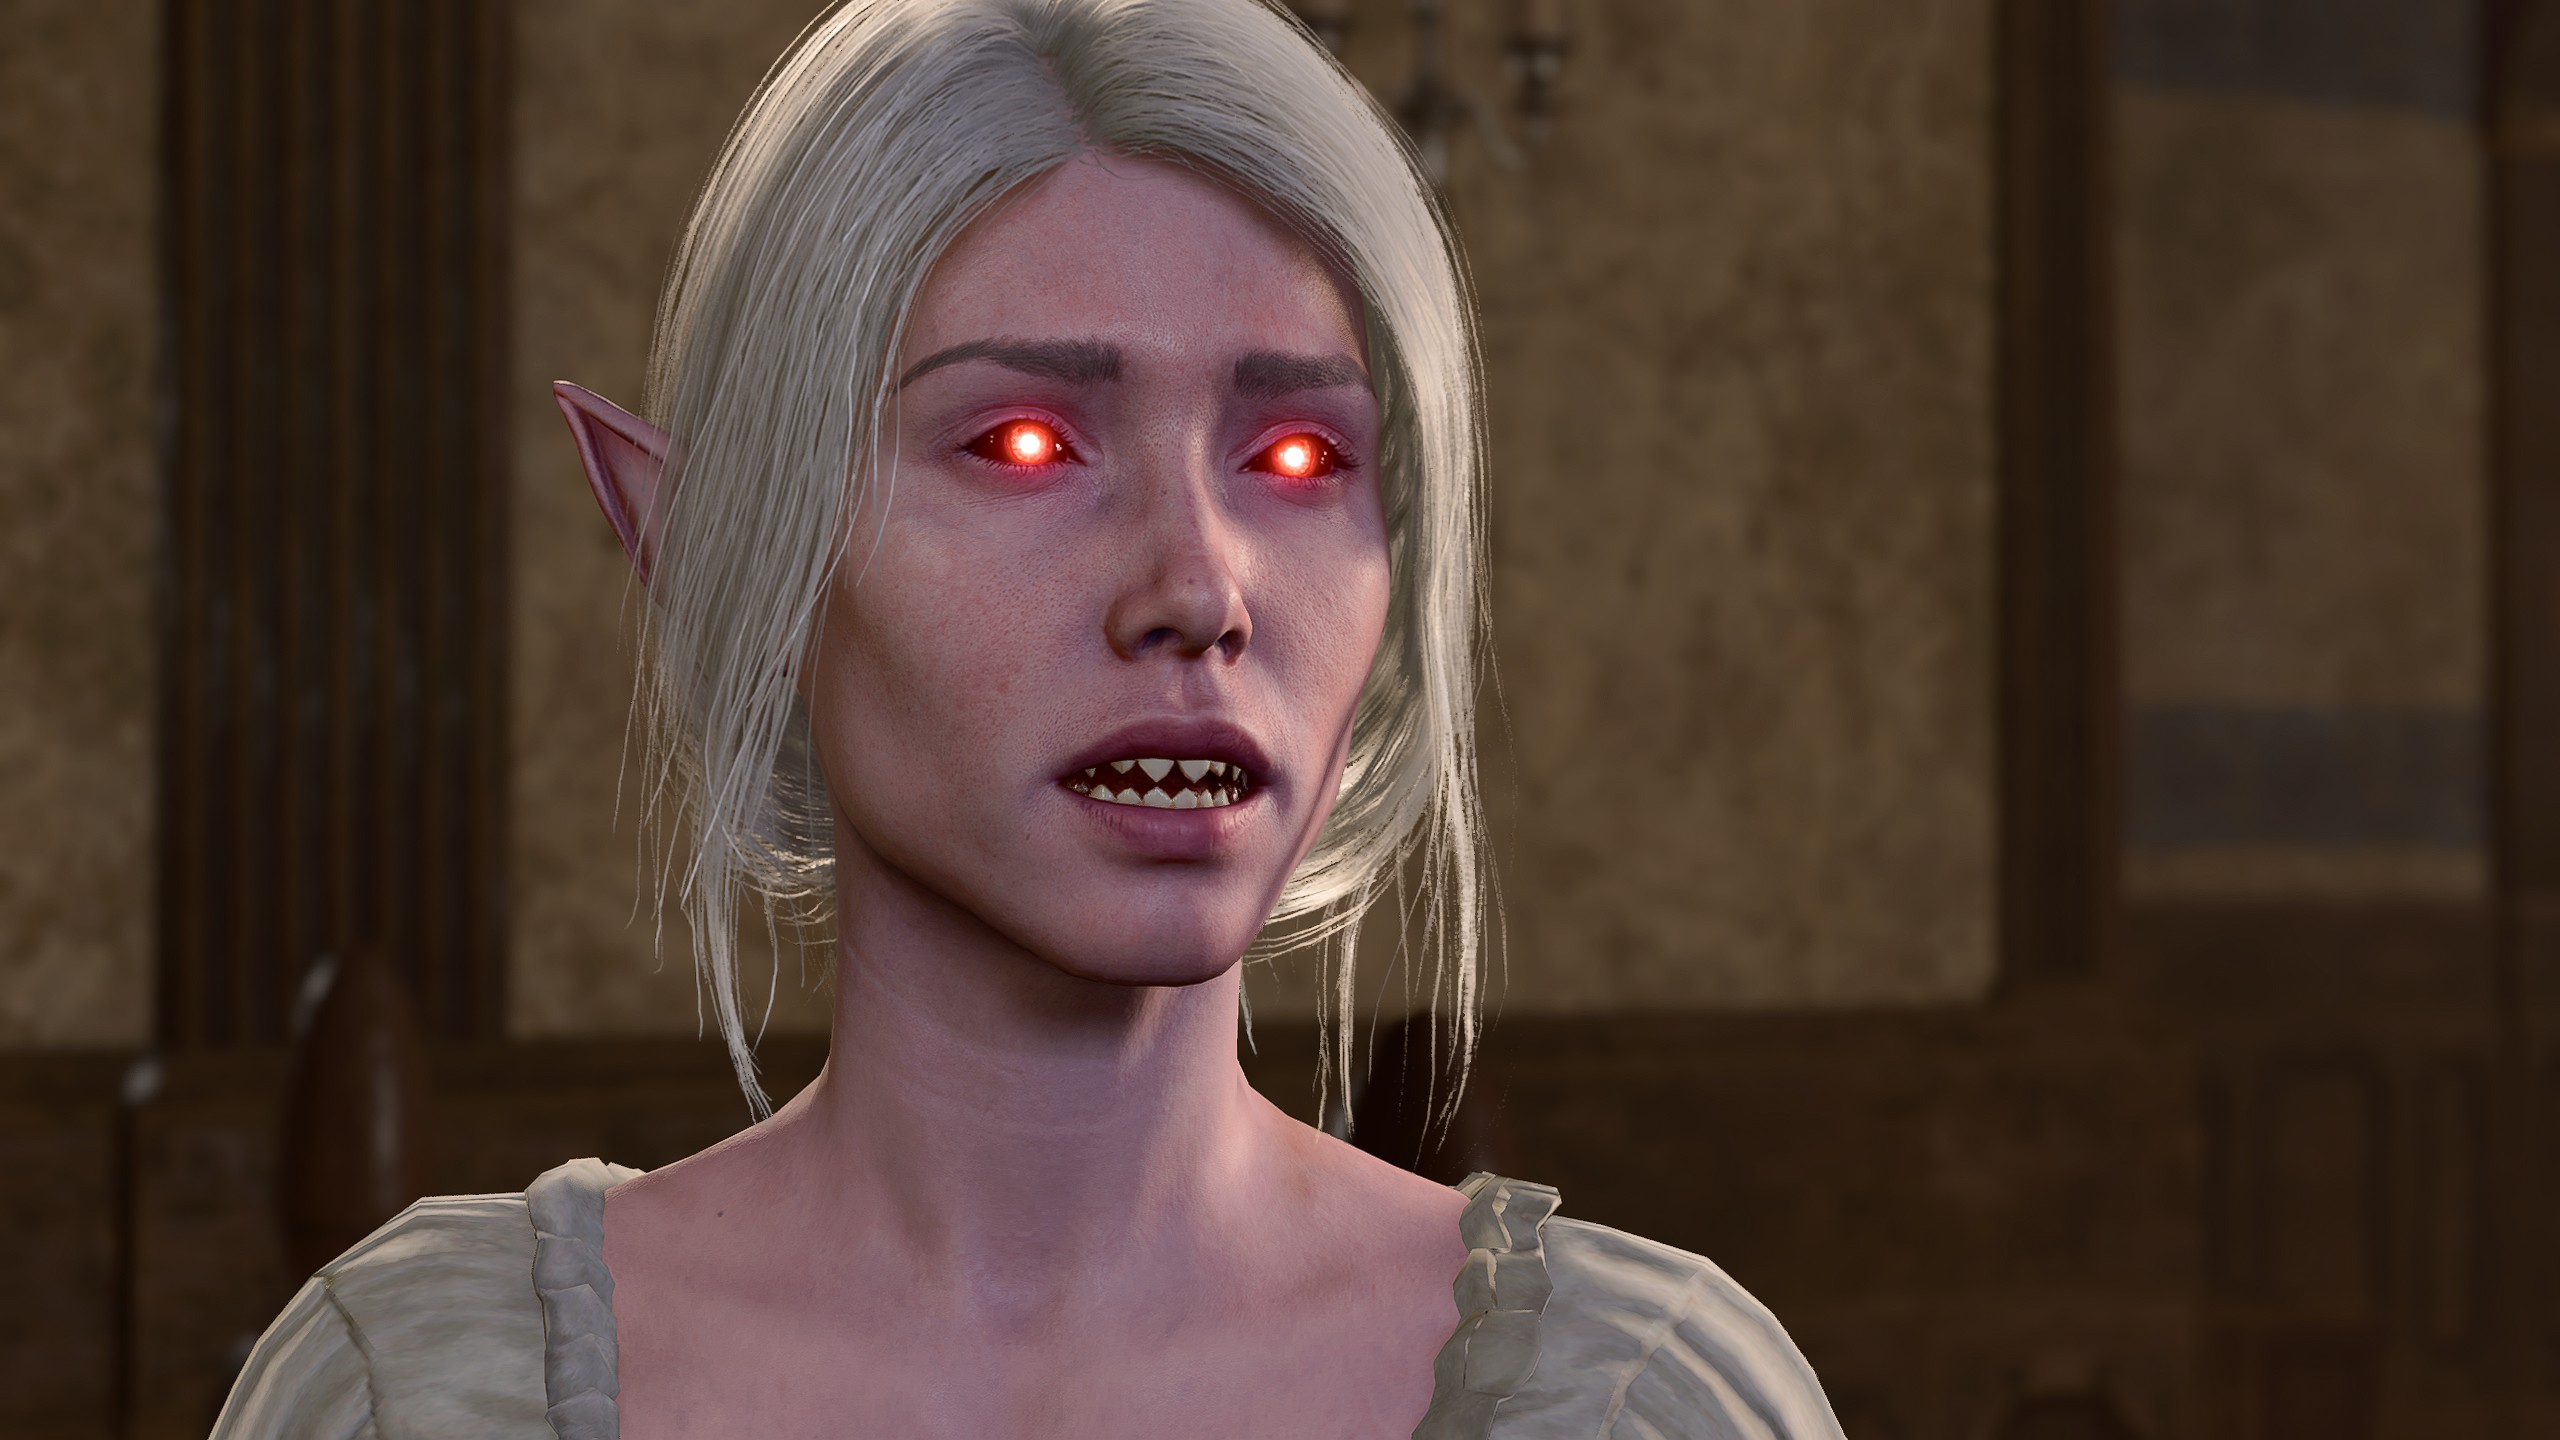 A vampire spawn with red eyes